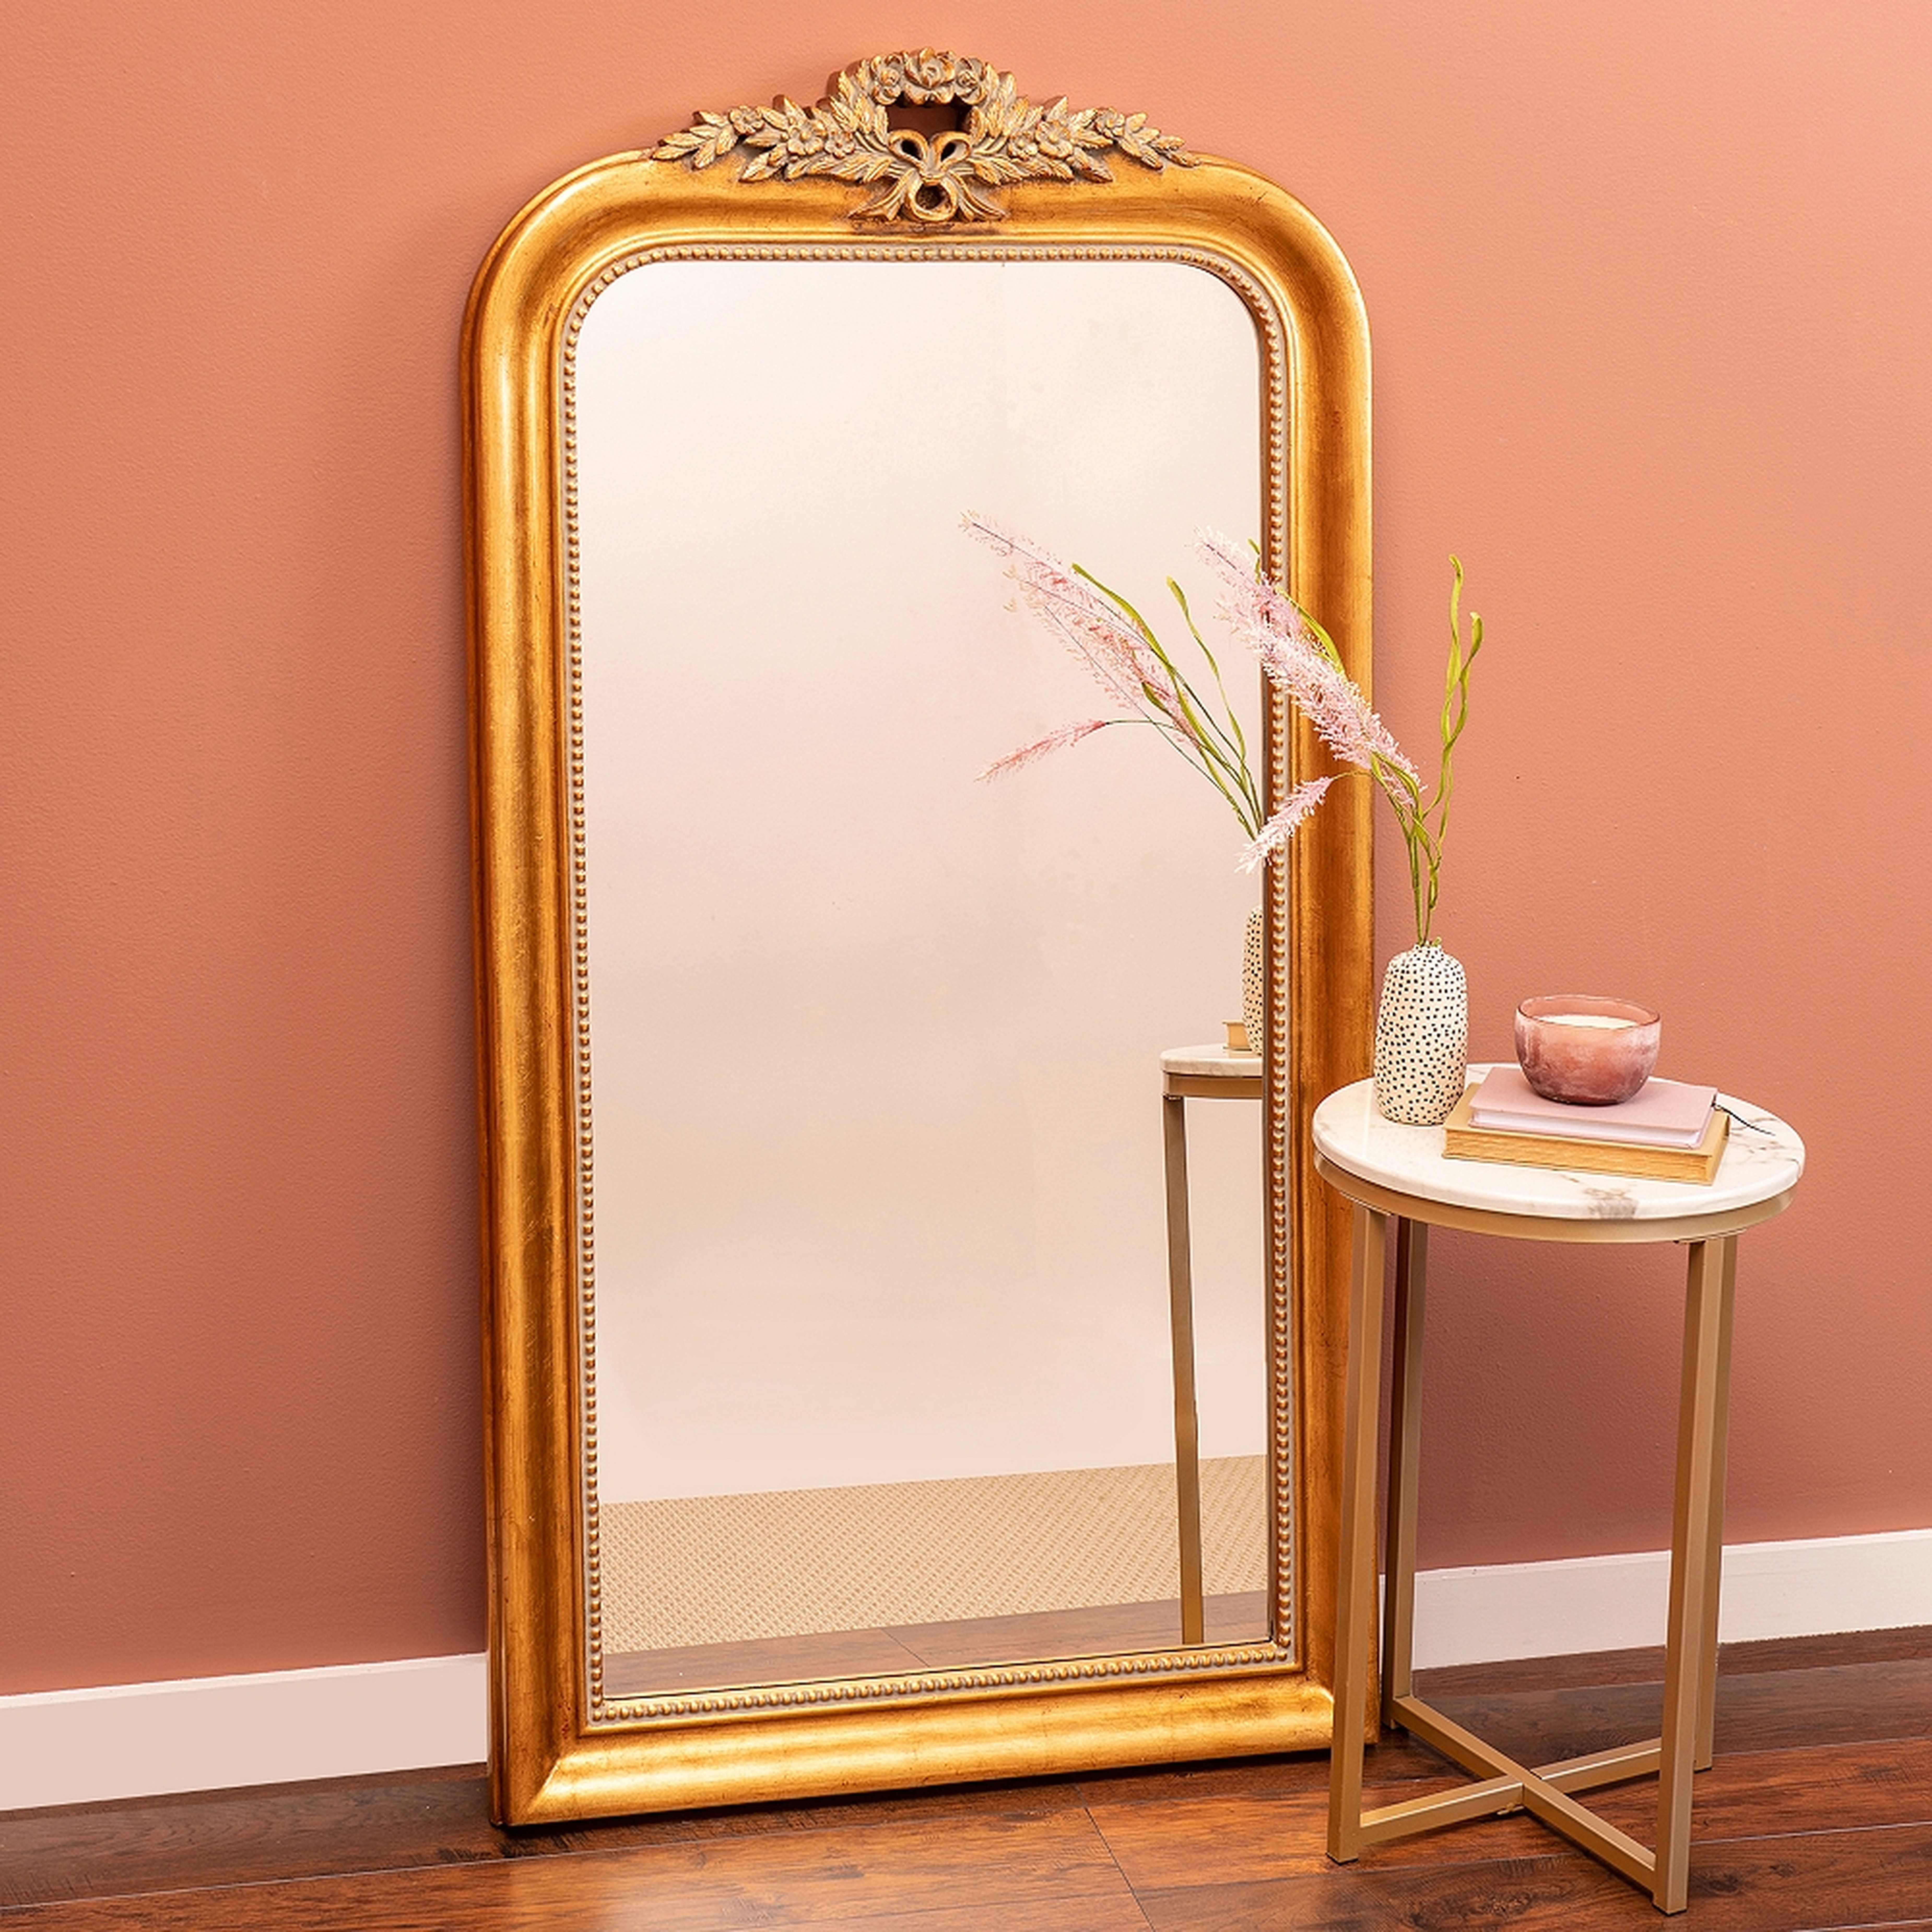 Camilla Antique Gold 30 1/2" x 58" Arched Floor Mirror - Style # 79A48 - Lamps Plus